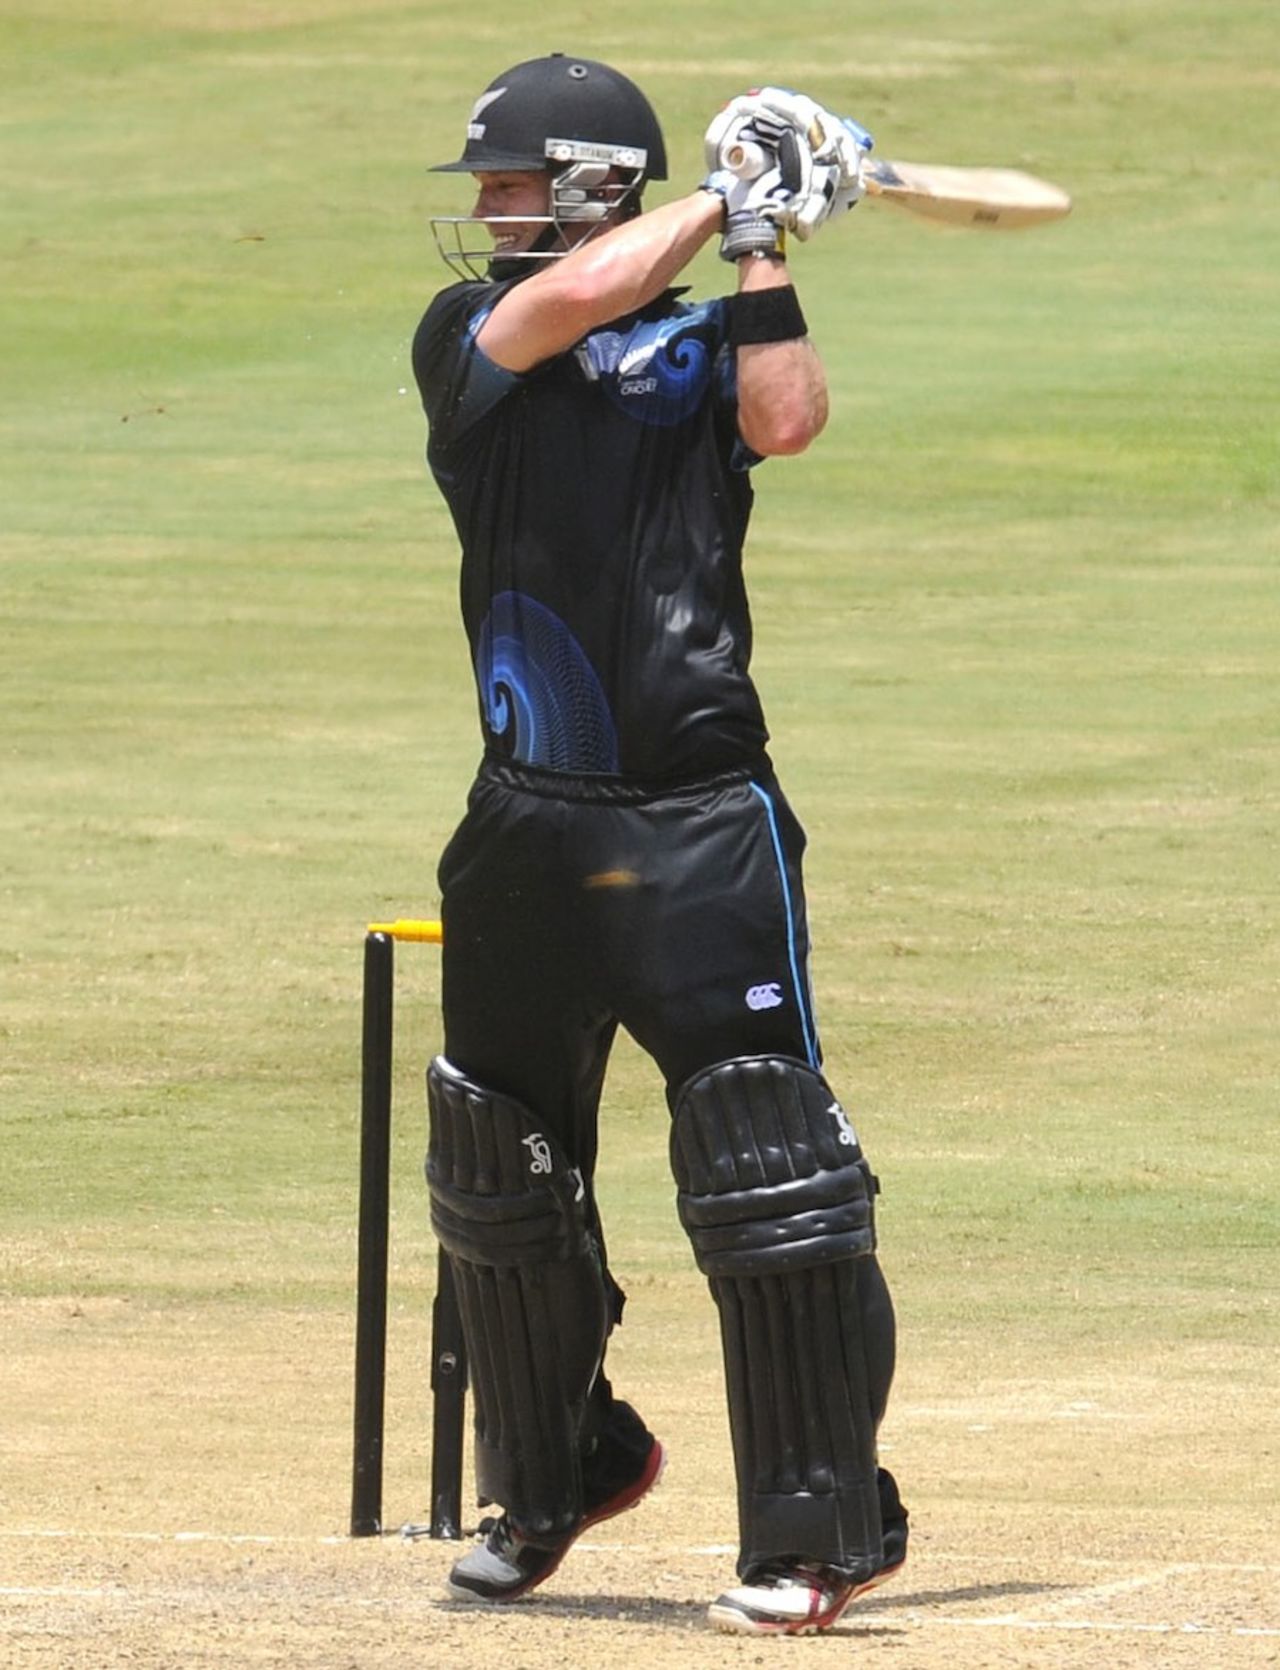 Carl Cachopa top scored with 80, India A v New Zealand A, 2nd unofficial ODI, Visakhapatnam, September 10, 2013